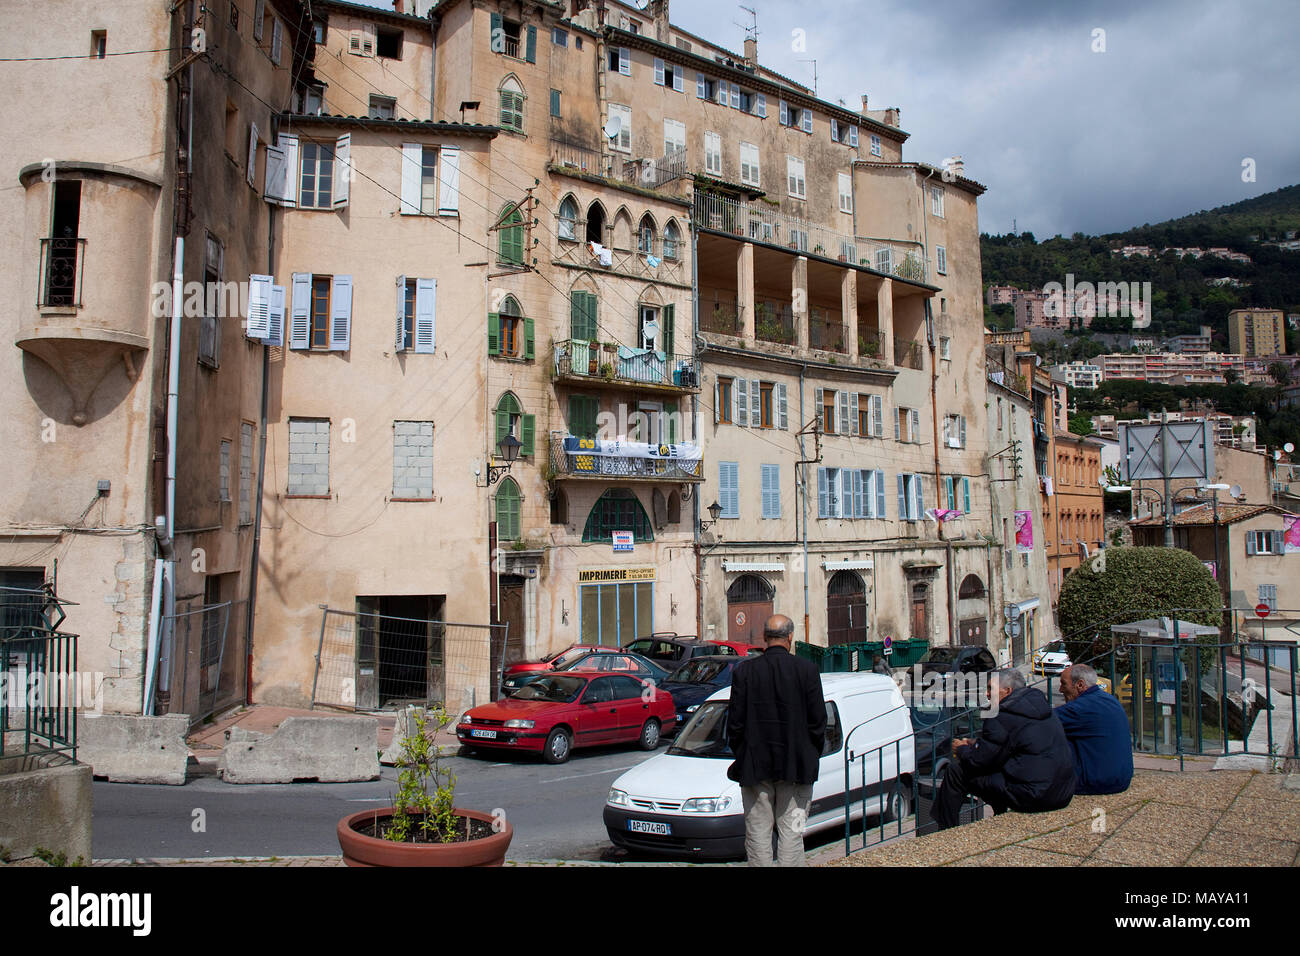 House facade with out hanging laundry, old town of Grasse, Alpes-Maritimes, South France, France, Europe Stock Photo